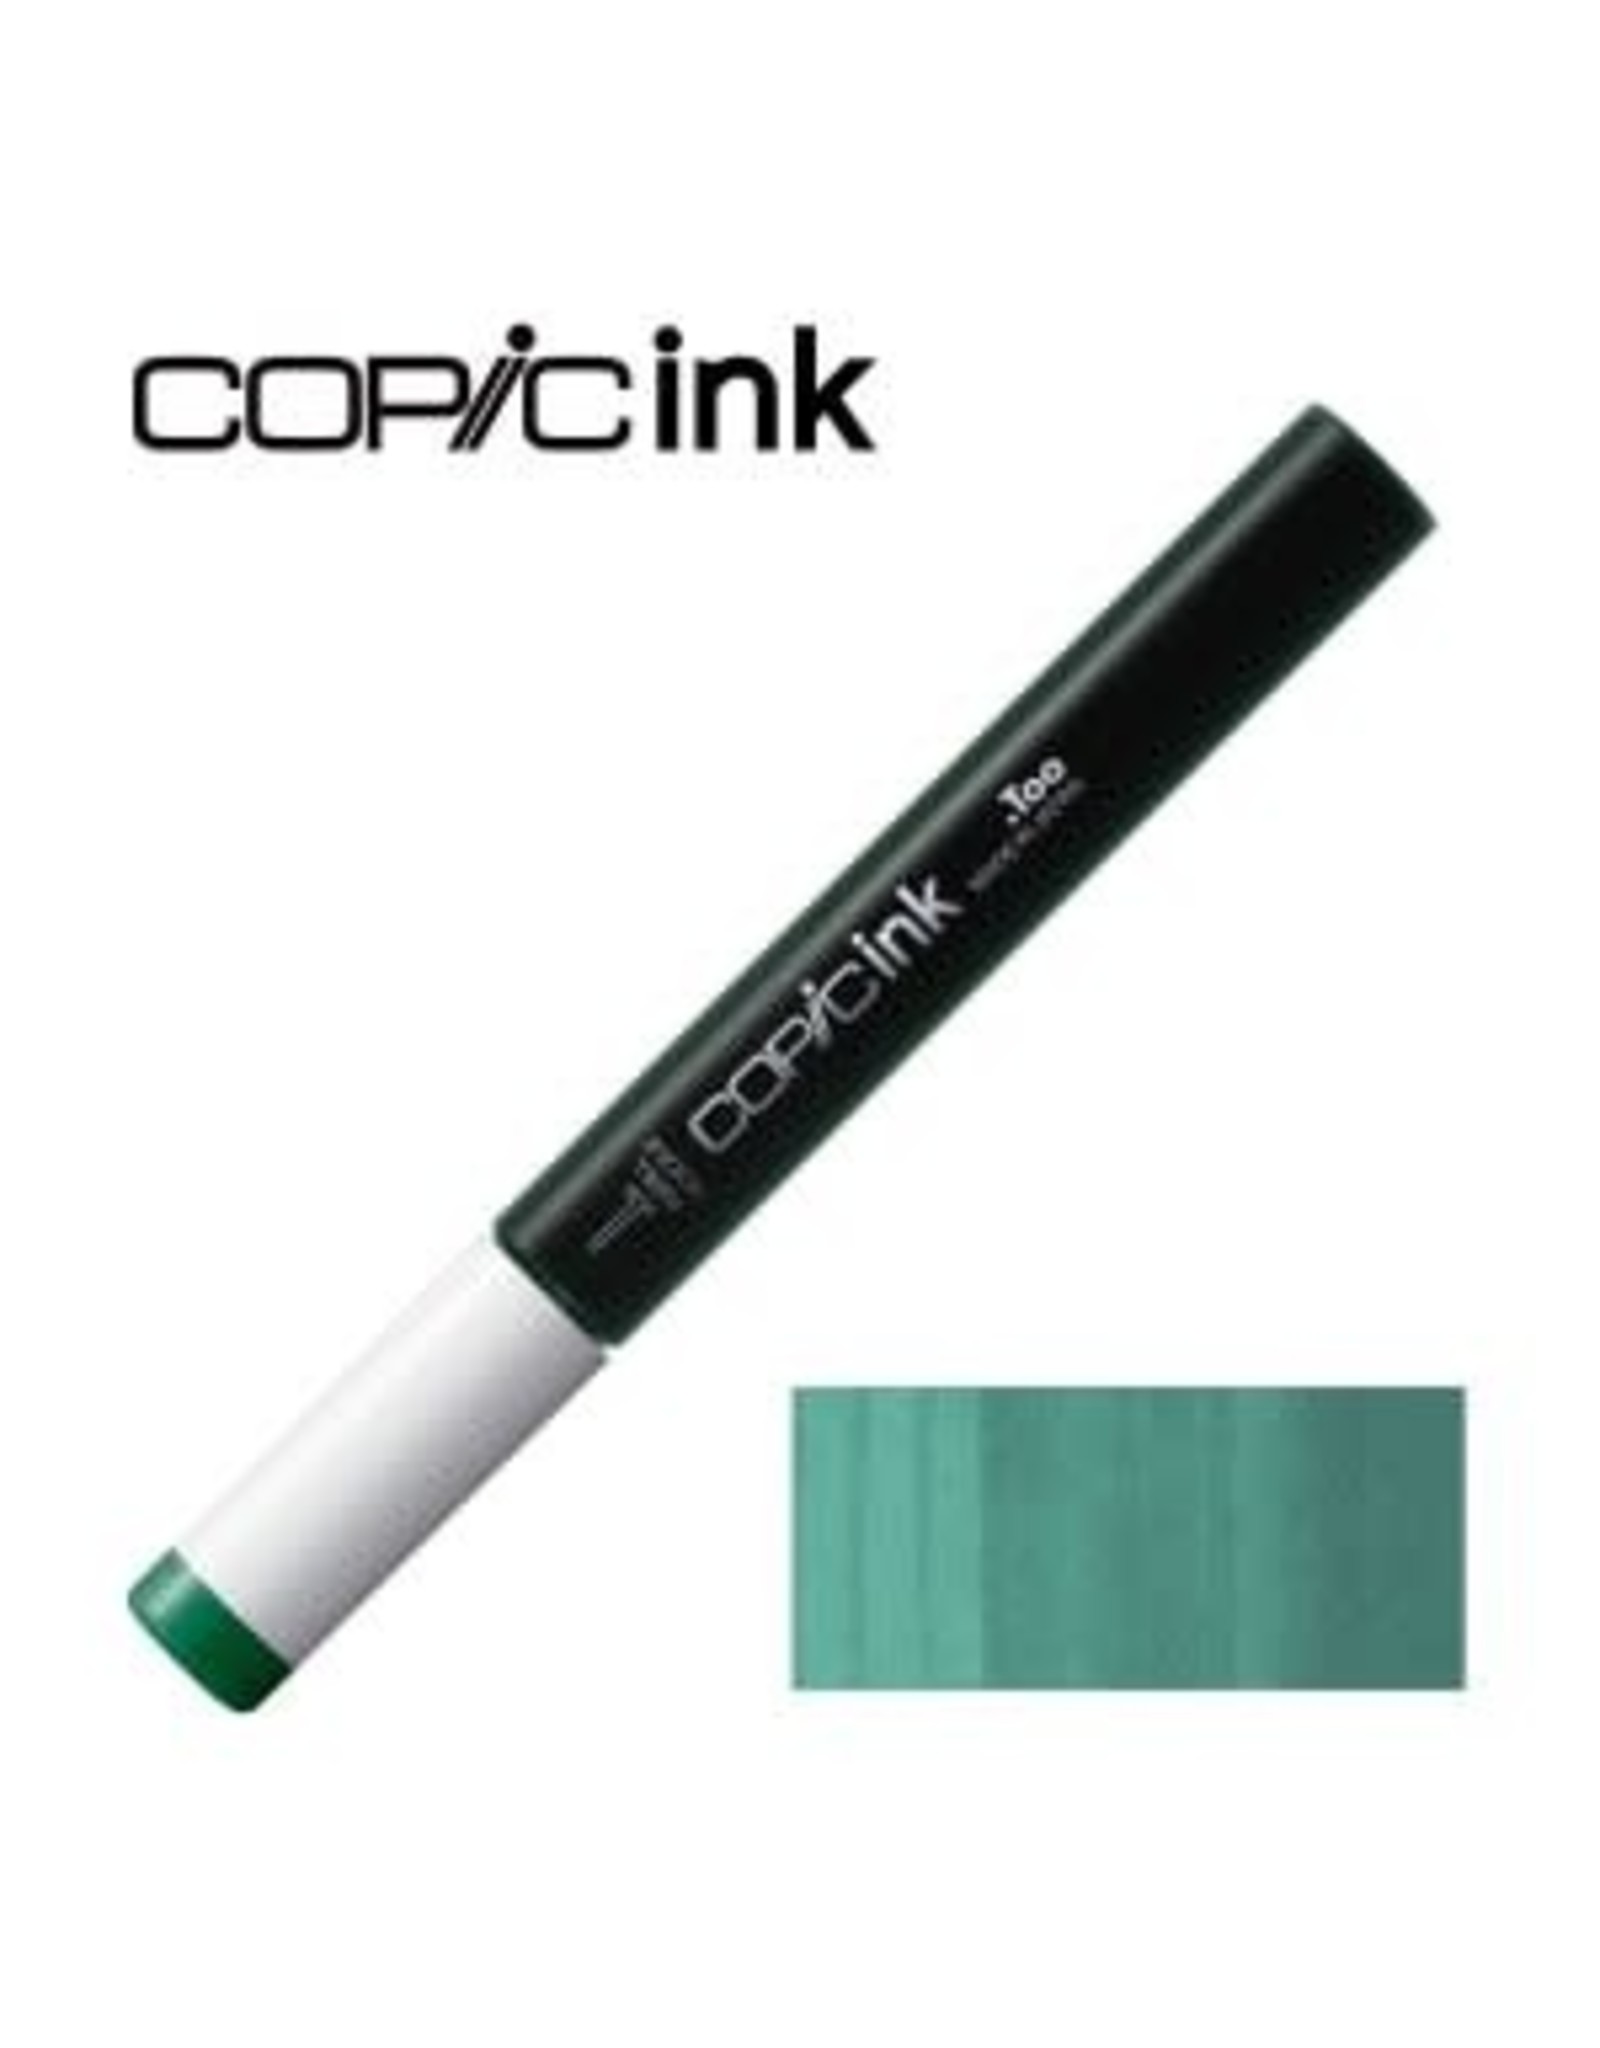 COPIC COPIC G17 FOREST GREEN REFILL